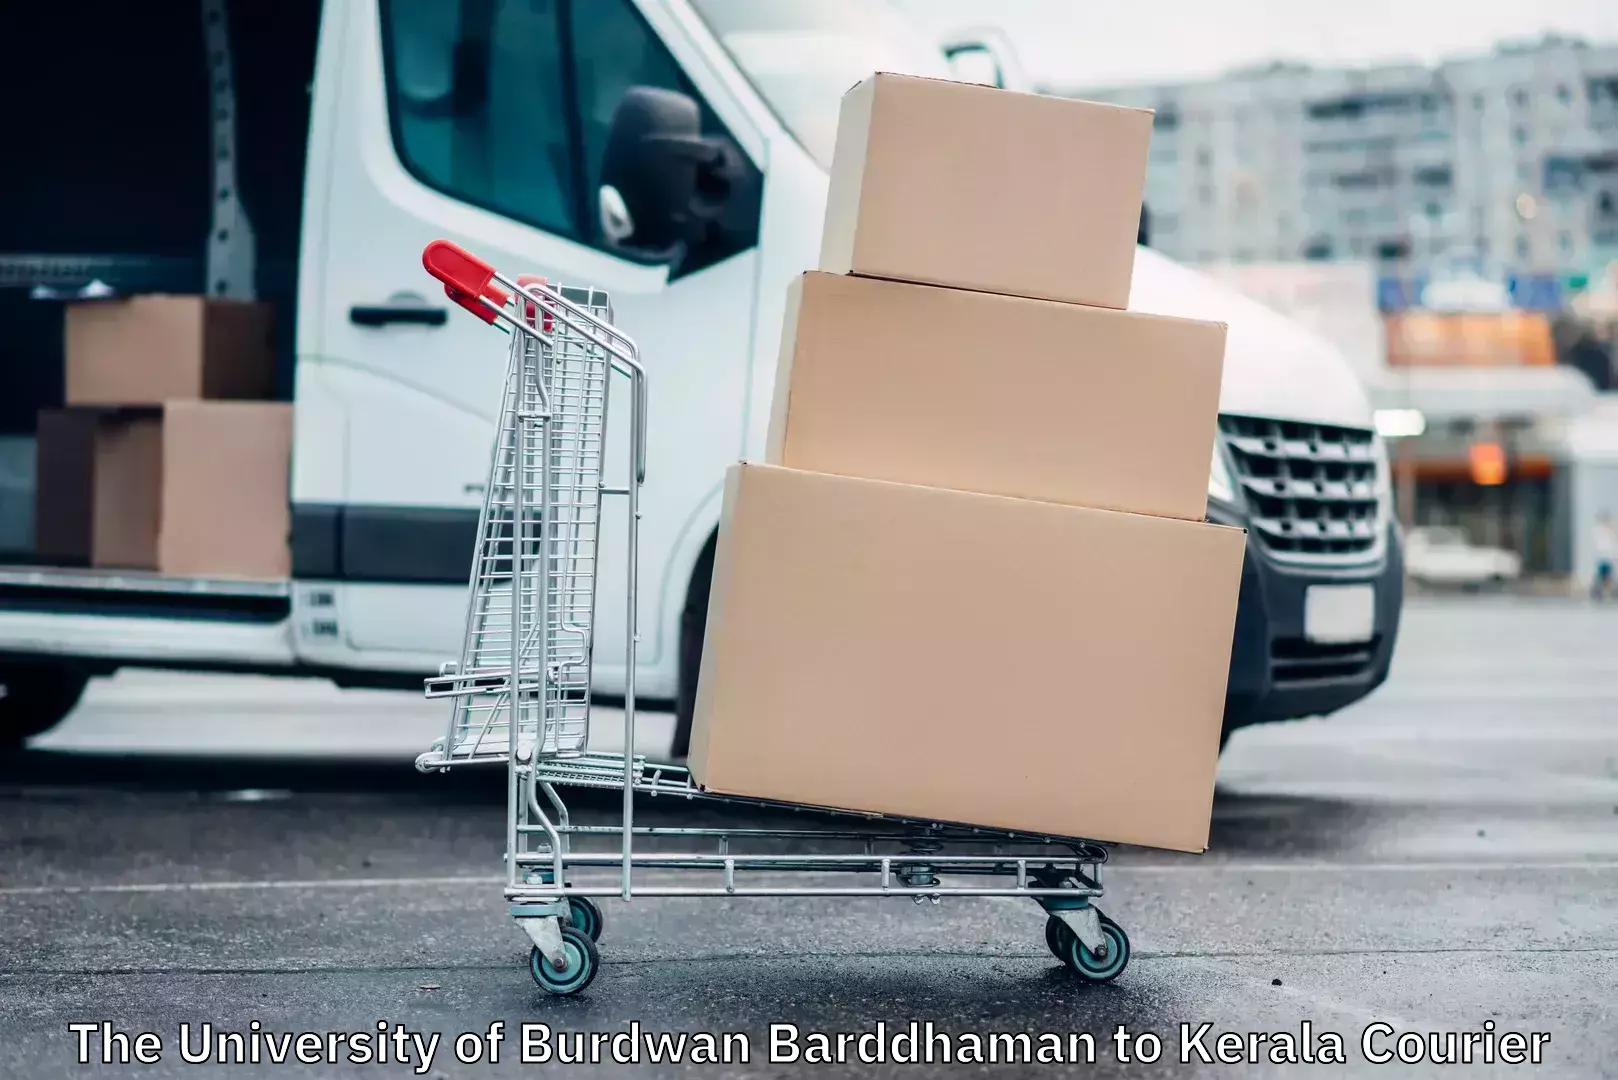 Professional parcel services The University of Burdwan Barddhaman to Kerala